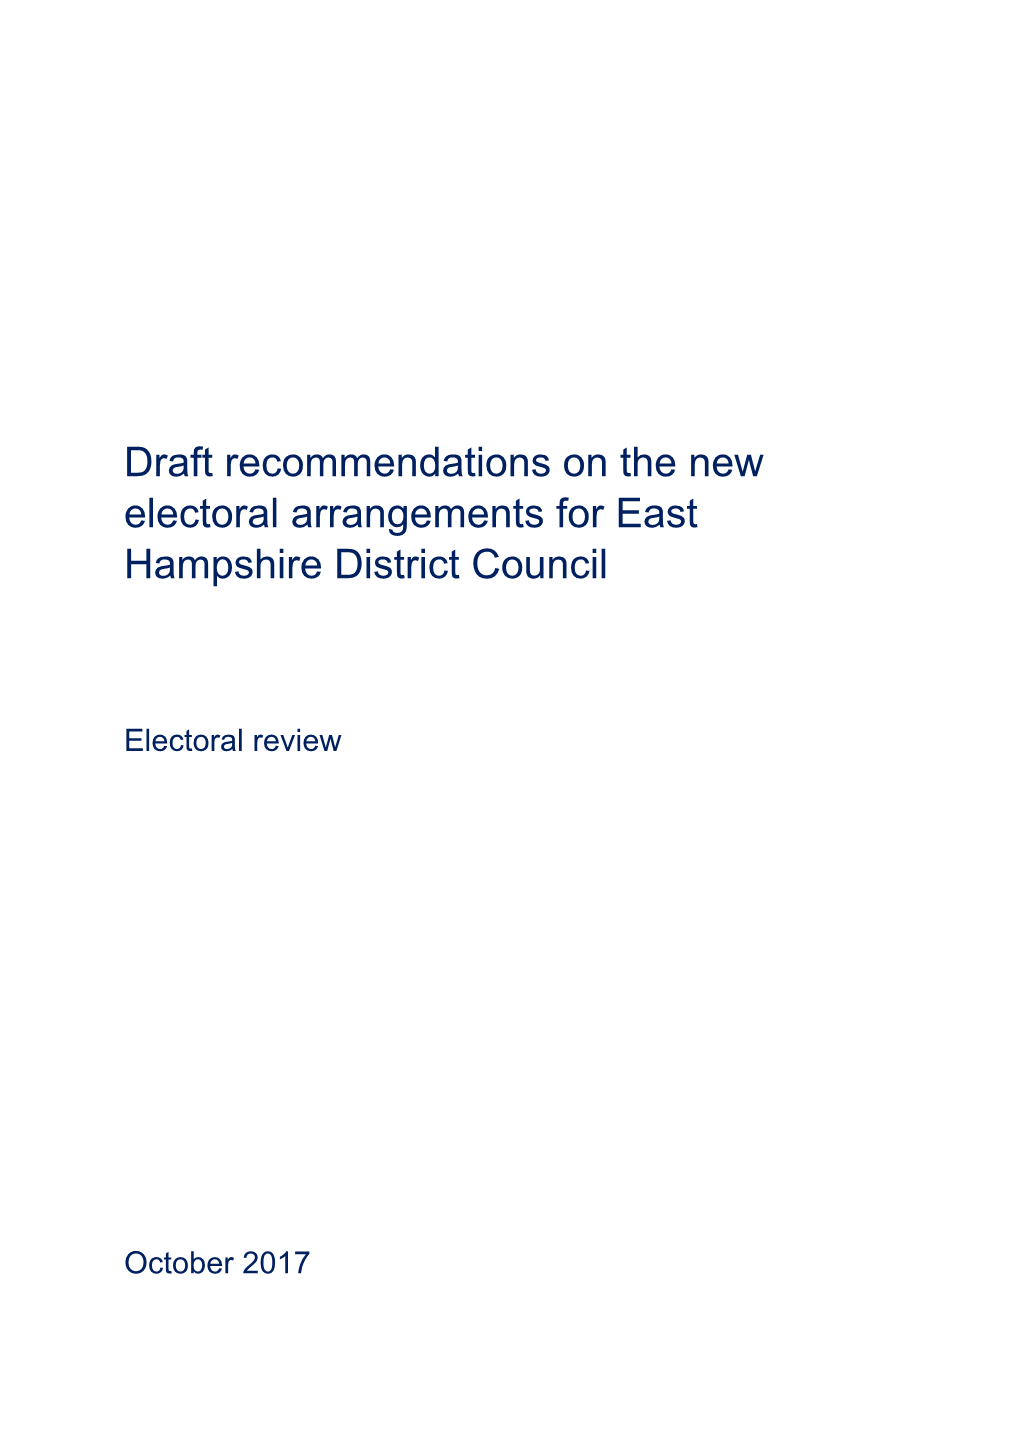 Draft Recommendations on the New Electoral Arrangements for East Hampshire District Council